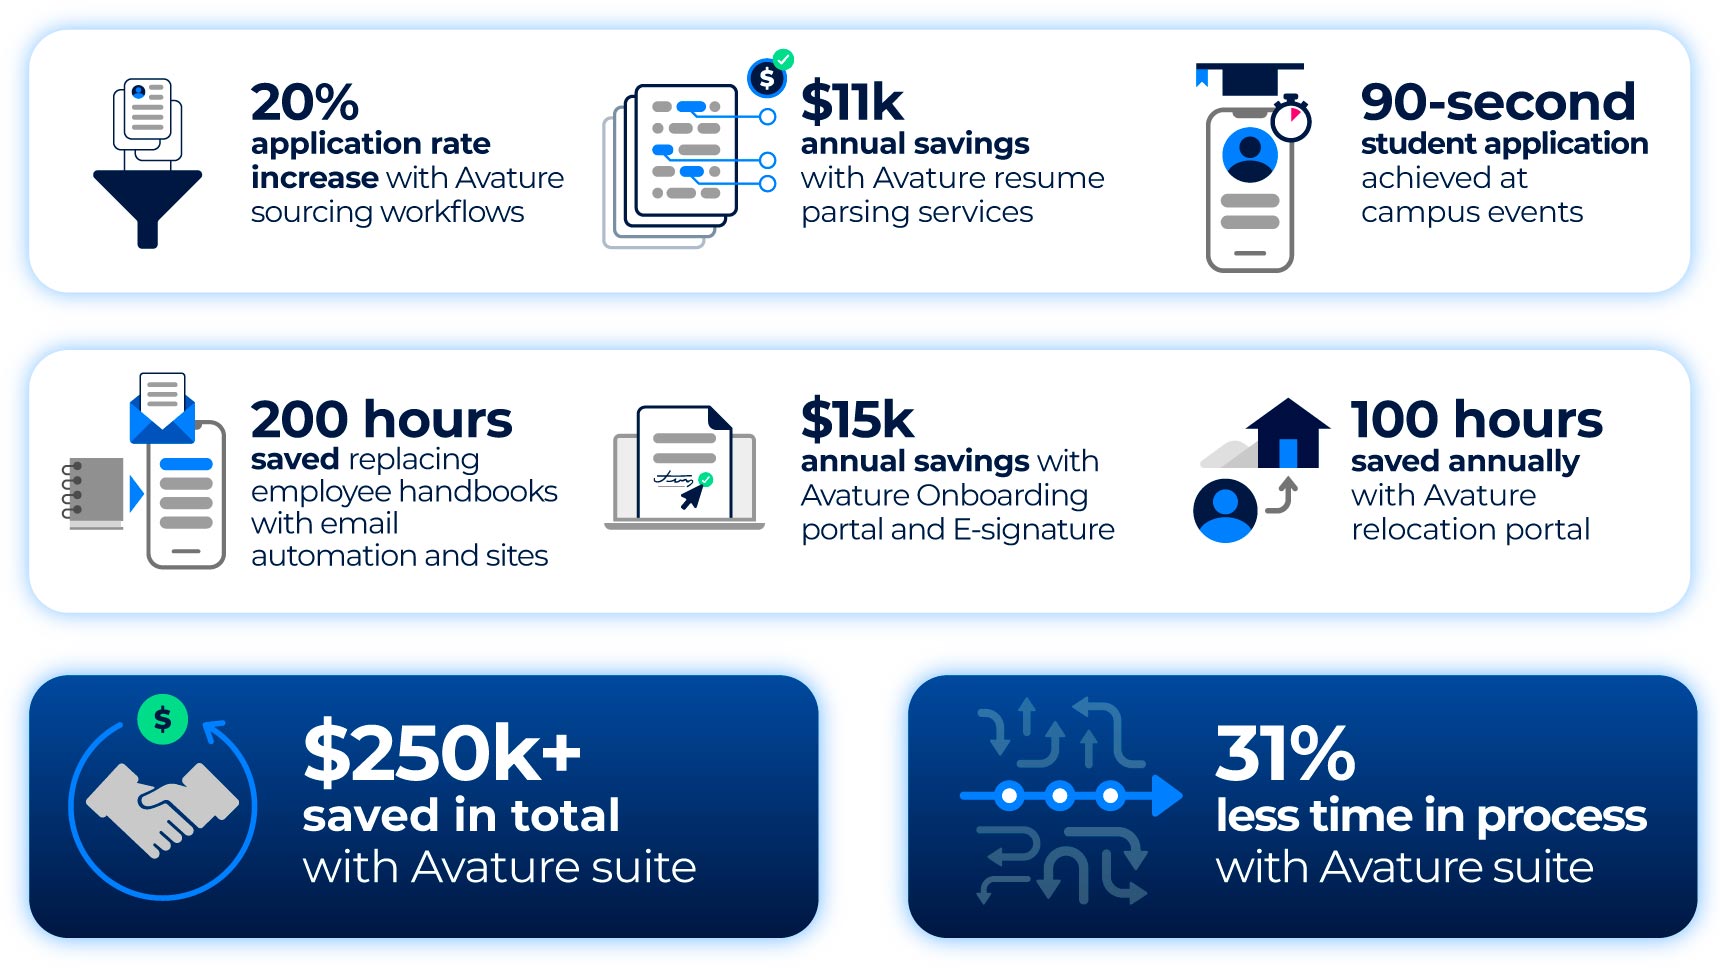 A summary of achievements reached after implementing Avature, like saving over 250000 dollars and reducing processing time by 31%.